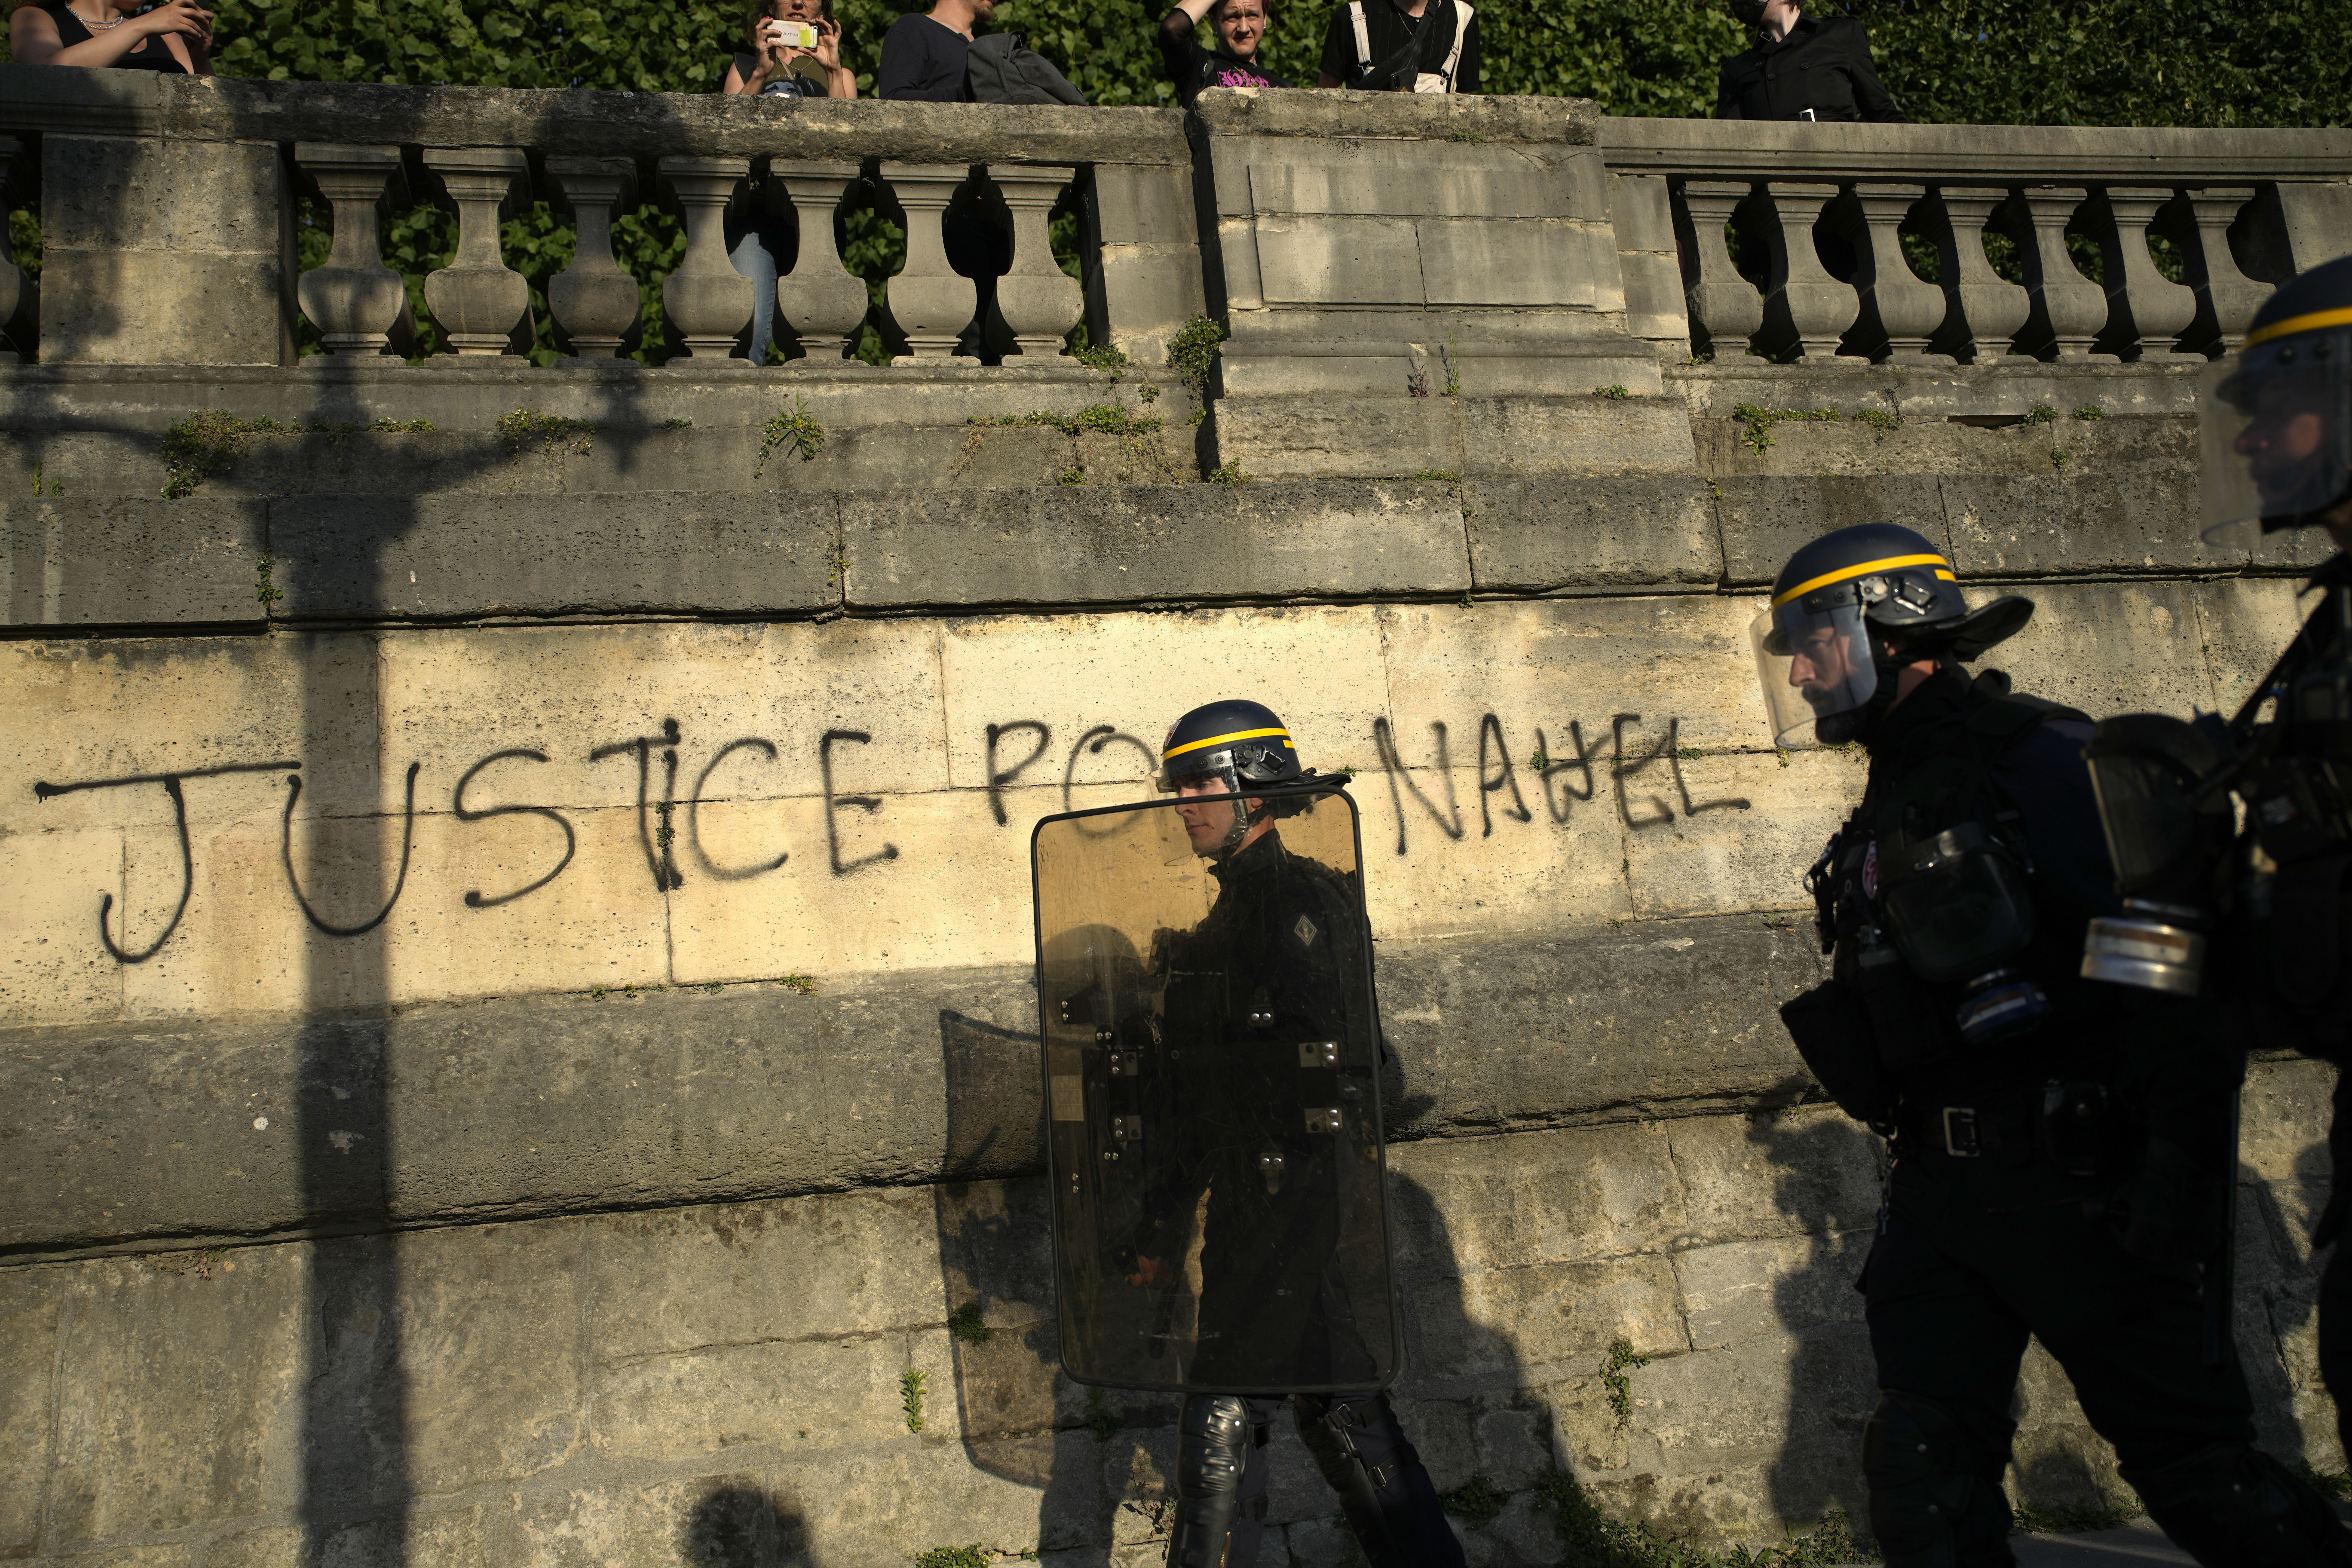 Police patrol as youths gather on Concorde square during a protest in Paris, France, Friday, June 30, 2023. French President Emmanuel Macron urged parents Friday to keep teenagers at home and proposed restrictions on social media to quell rioting spreading across France over the fatal police shooting of a 17-year-old driver. Writing on wall reads in French "Justice for Nahel" Photo credit: Lewis Joly, The Associated Press